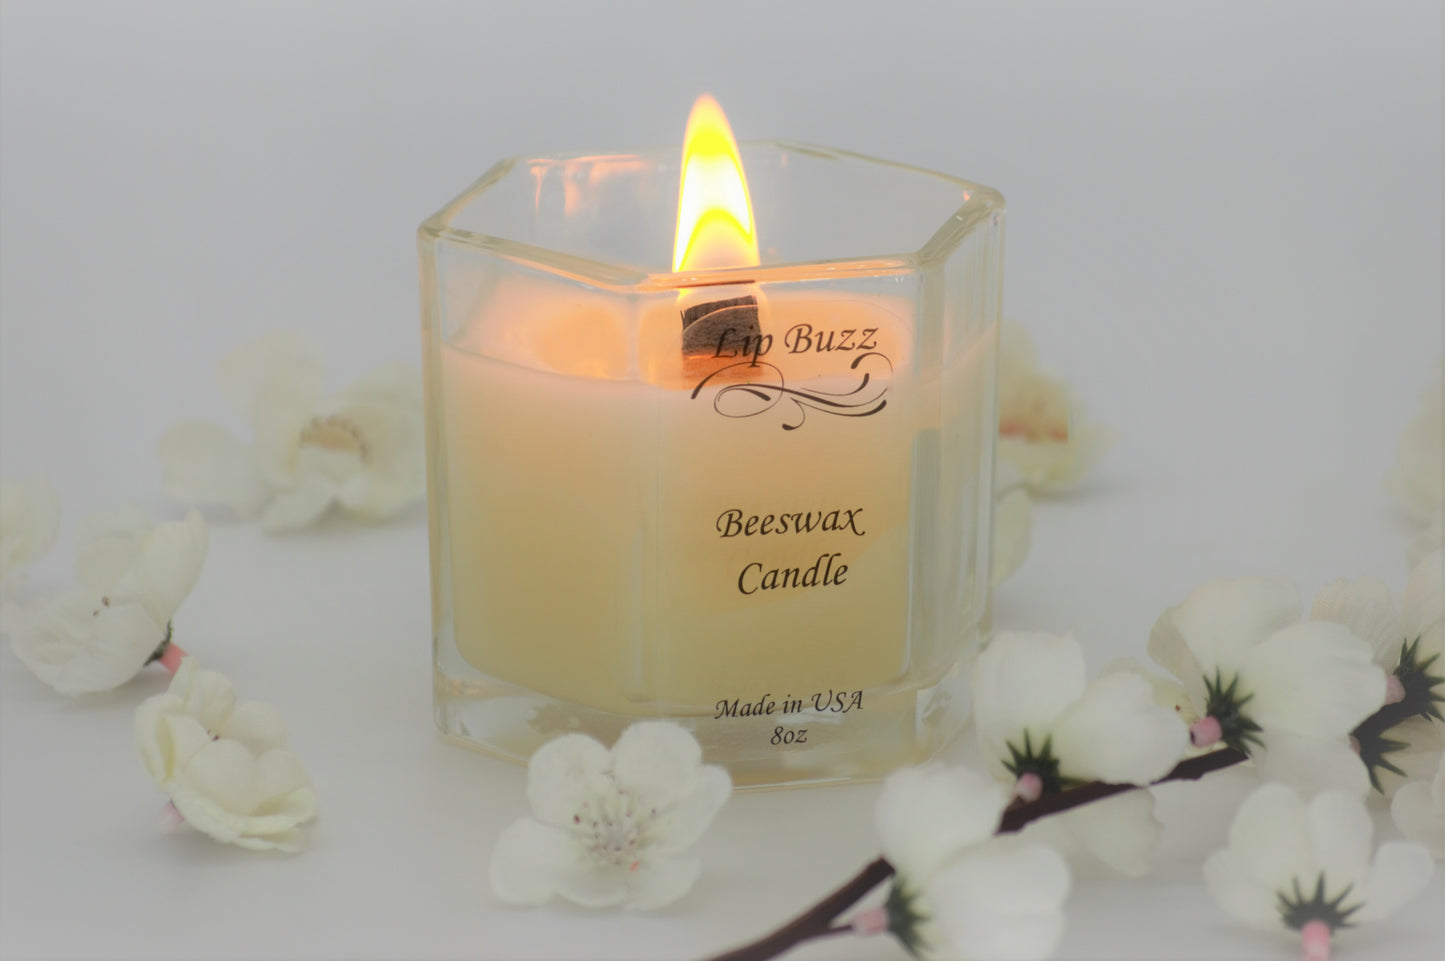 Burning beeswax candle